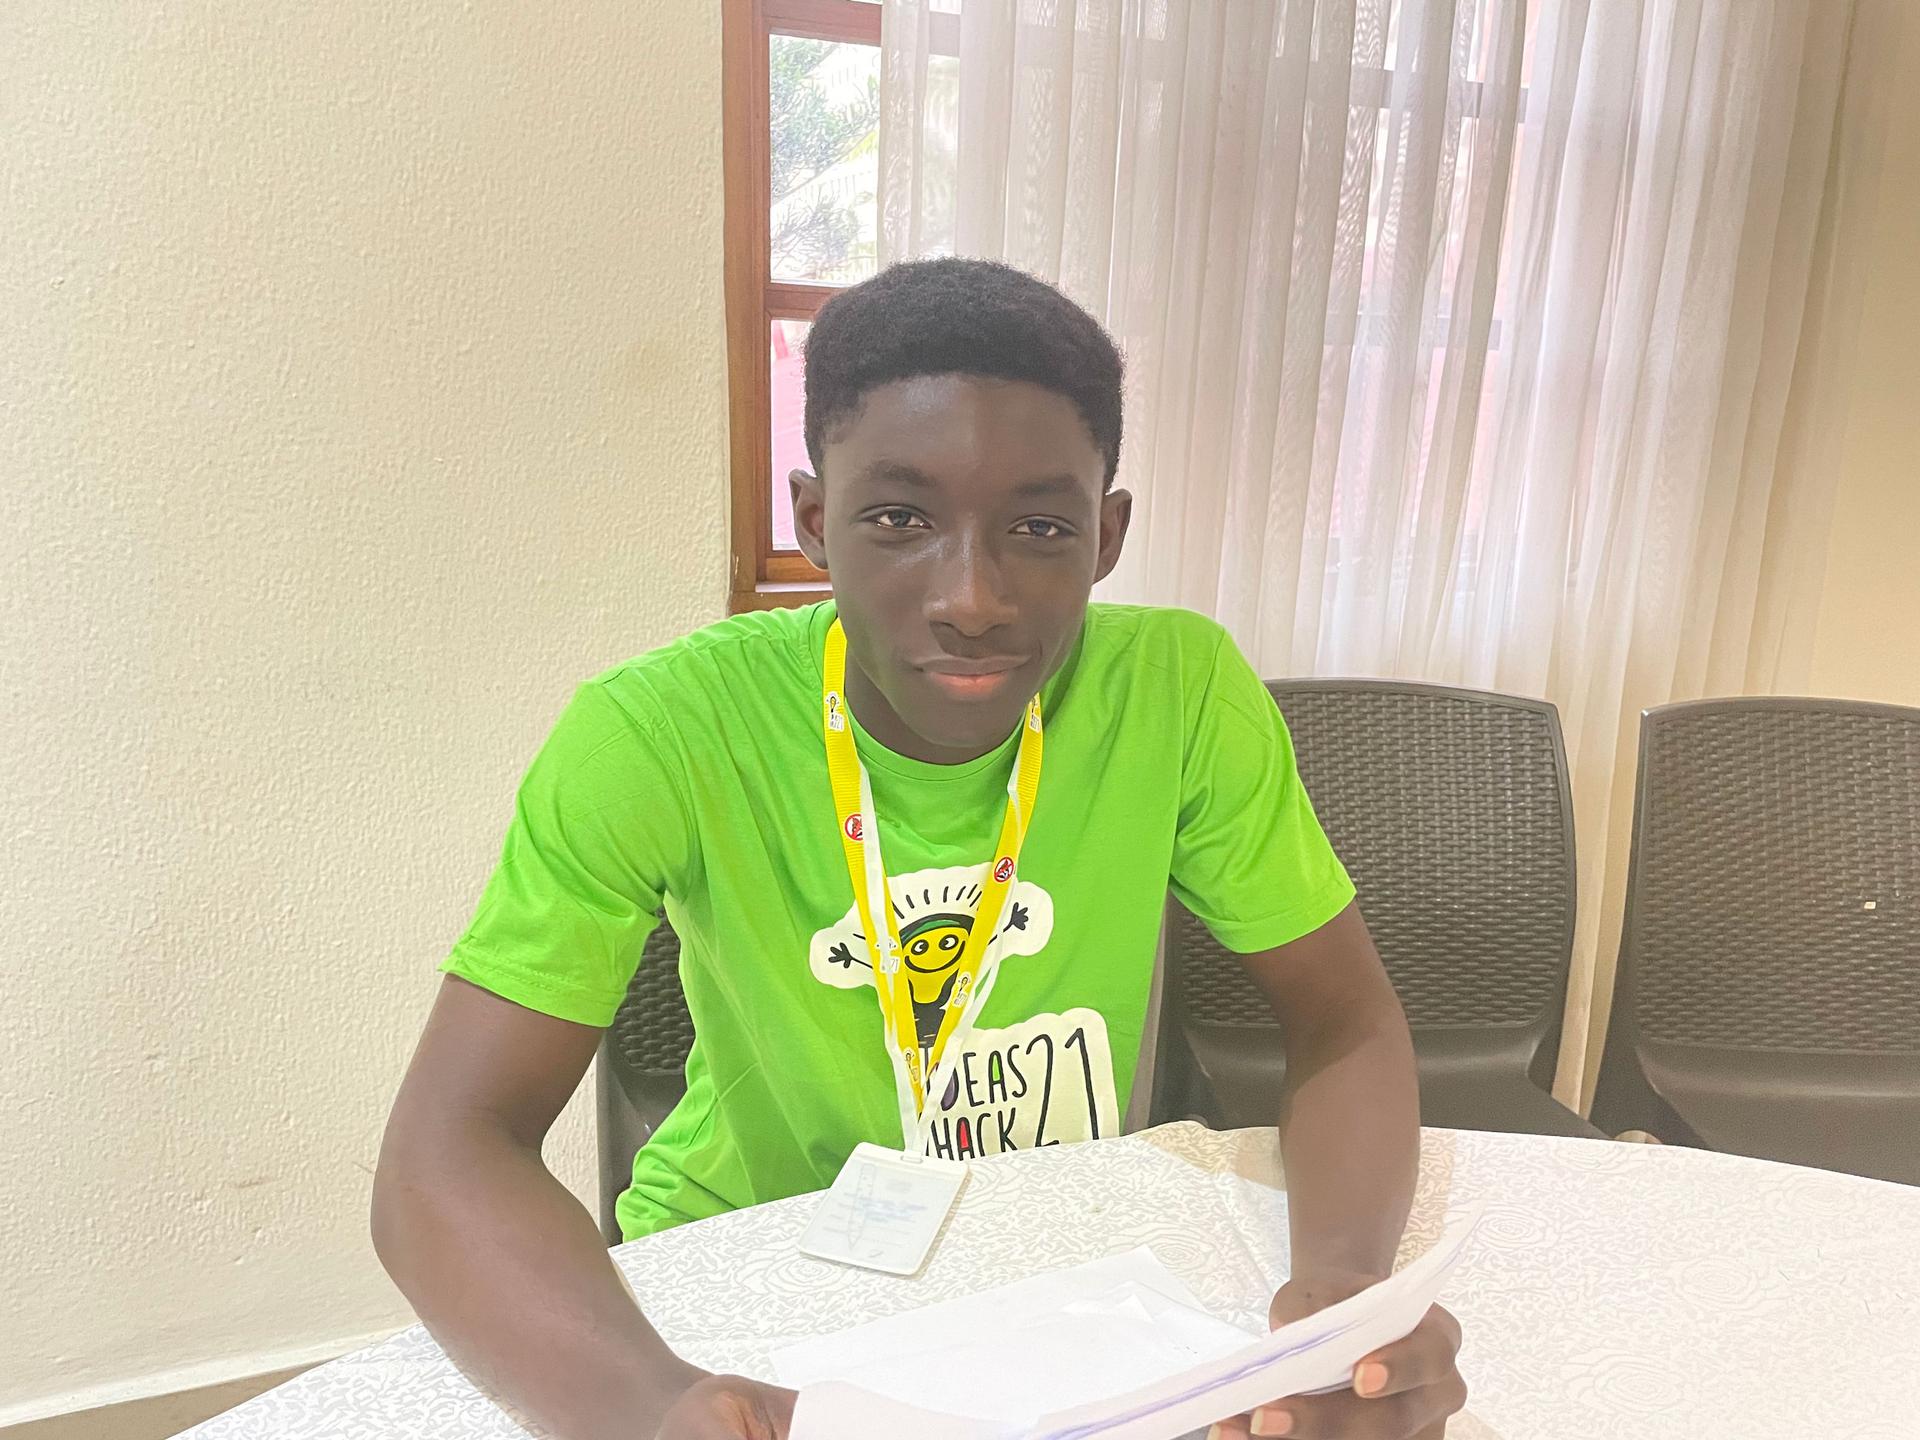 Nana Kwaku Amoako Oduro Mensah, 14, participates in a hackathon to find solutions for open defecation.